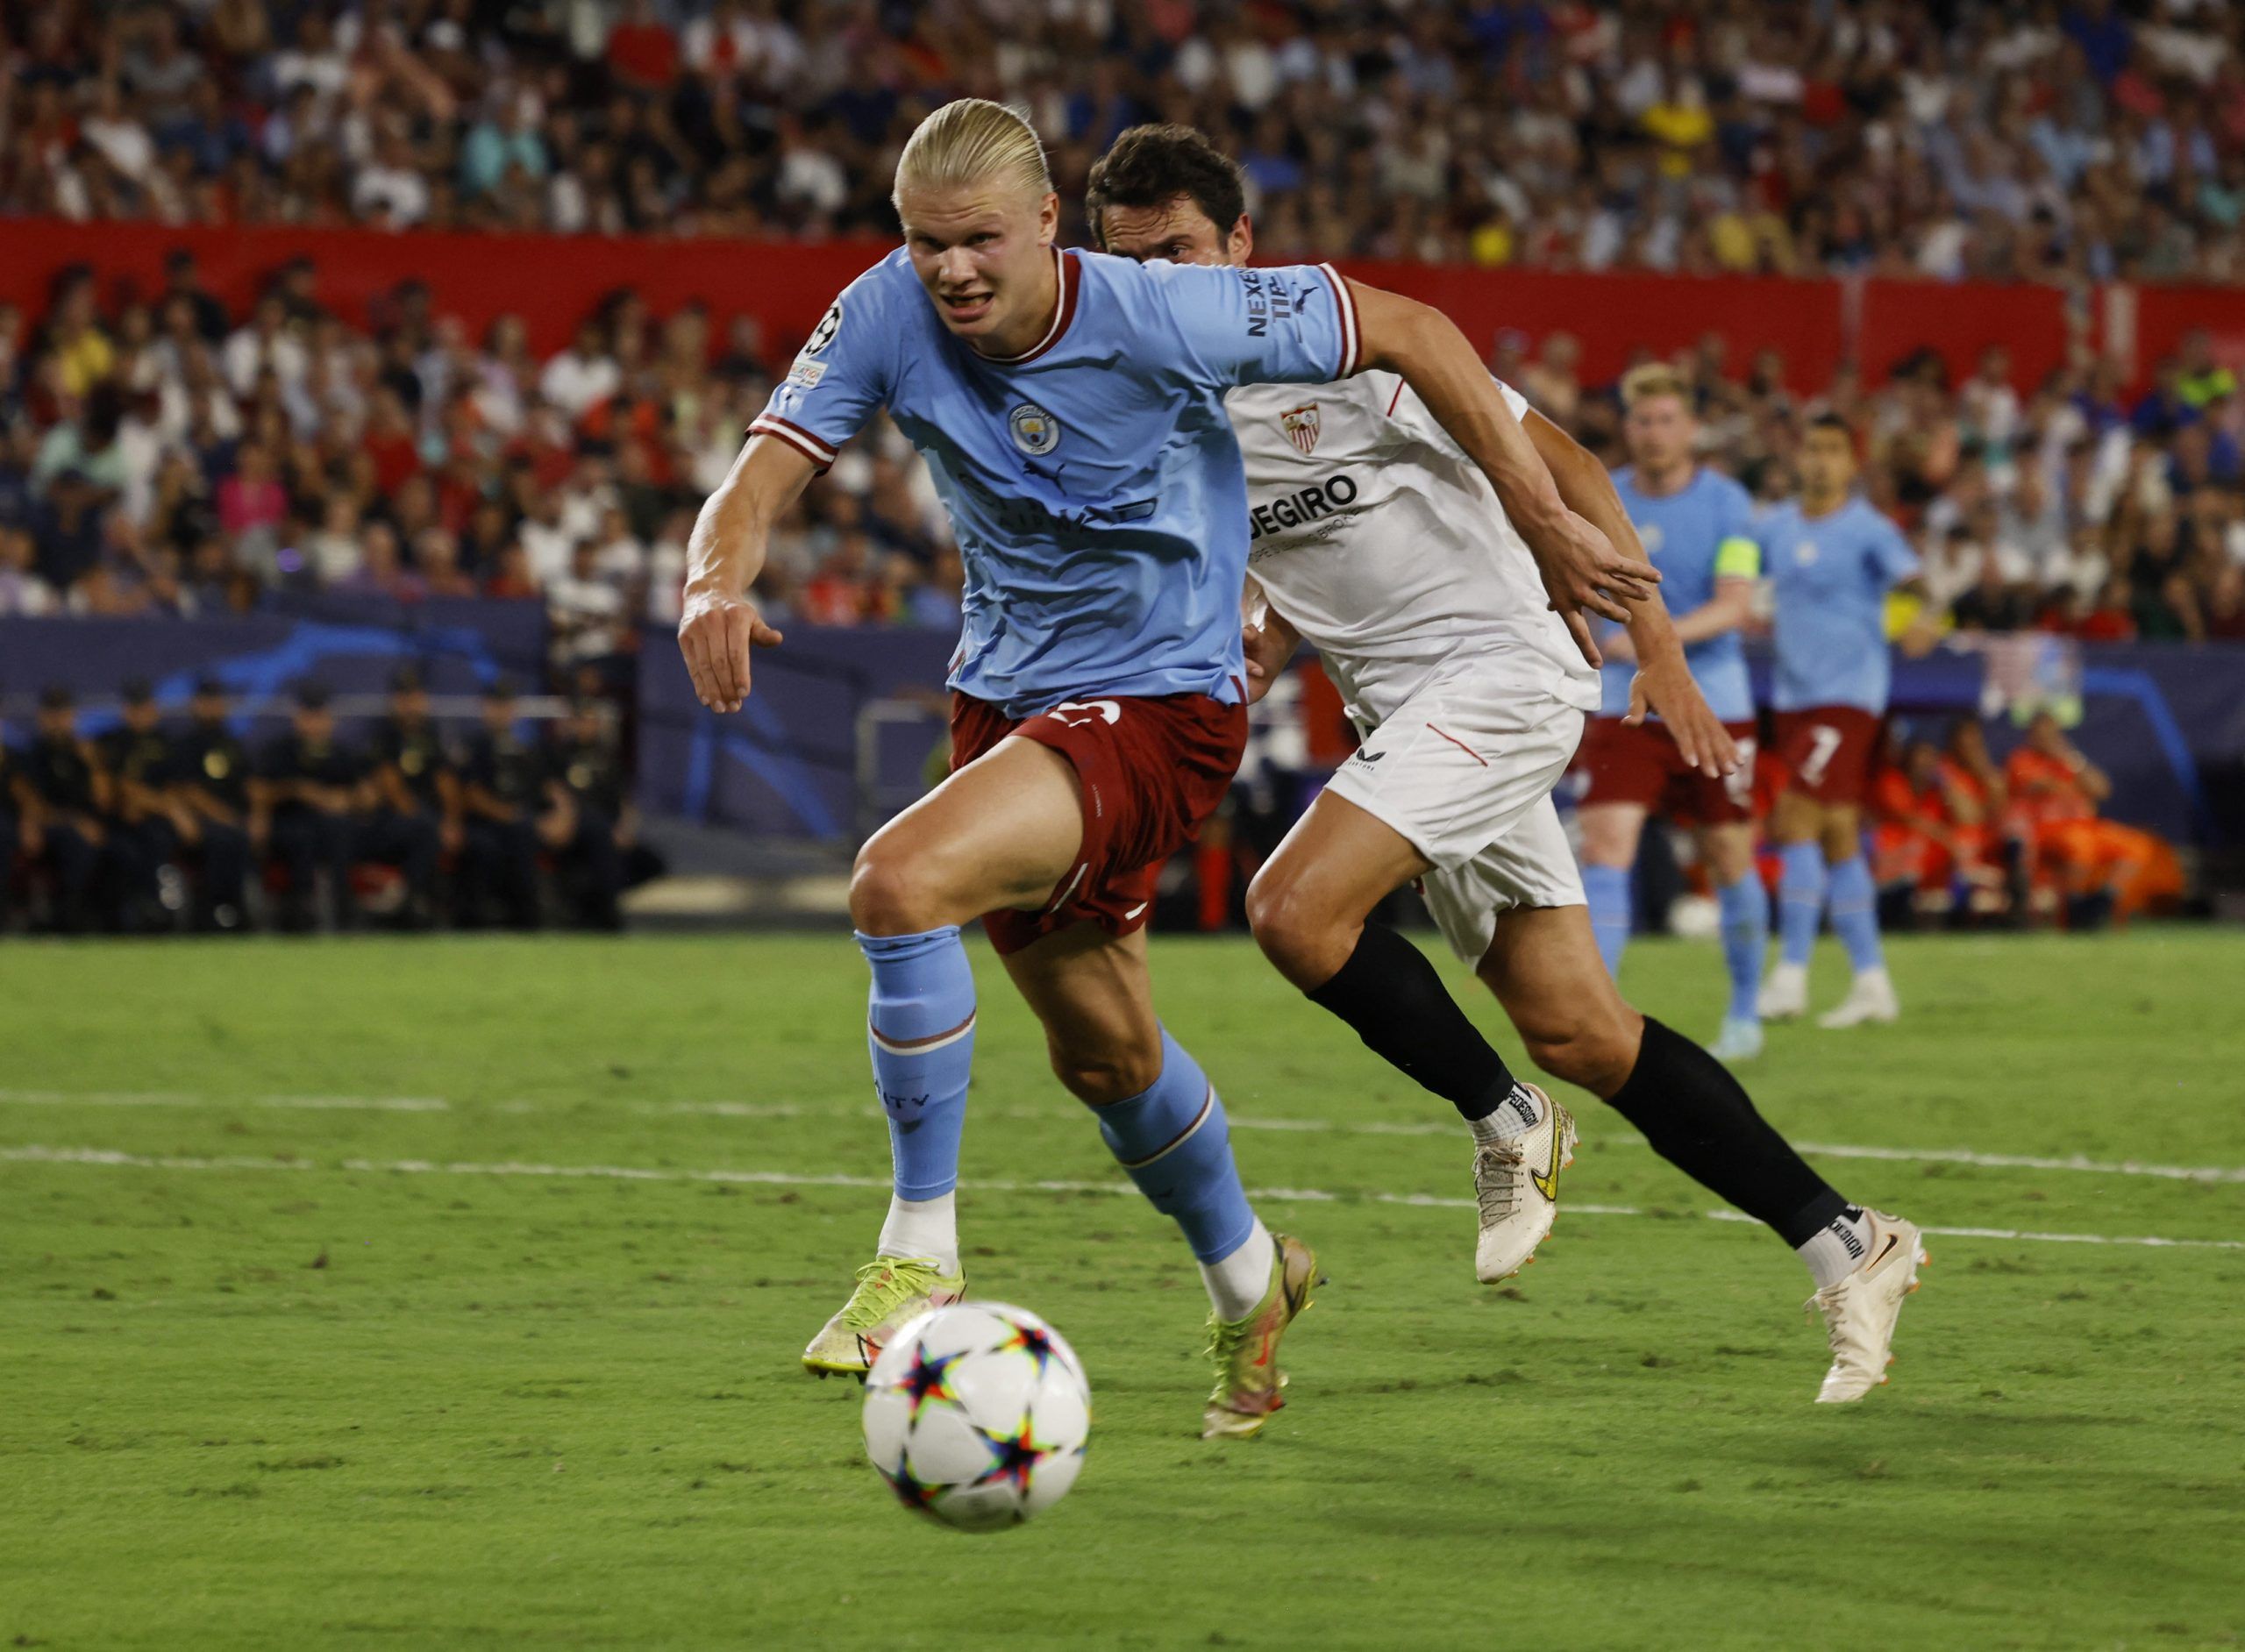 Manchester City: Erling Haaland brings transfer ‘pulling power’, claims Dharmesh Sheth -Follow up